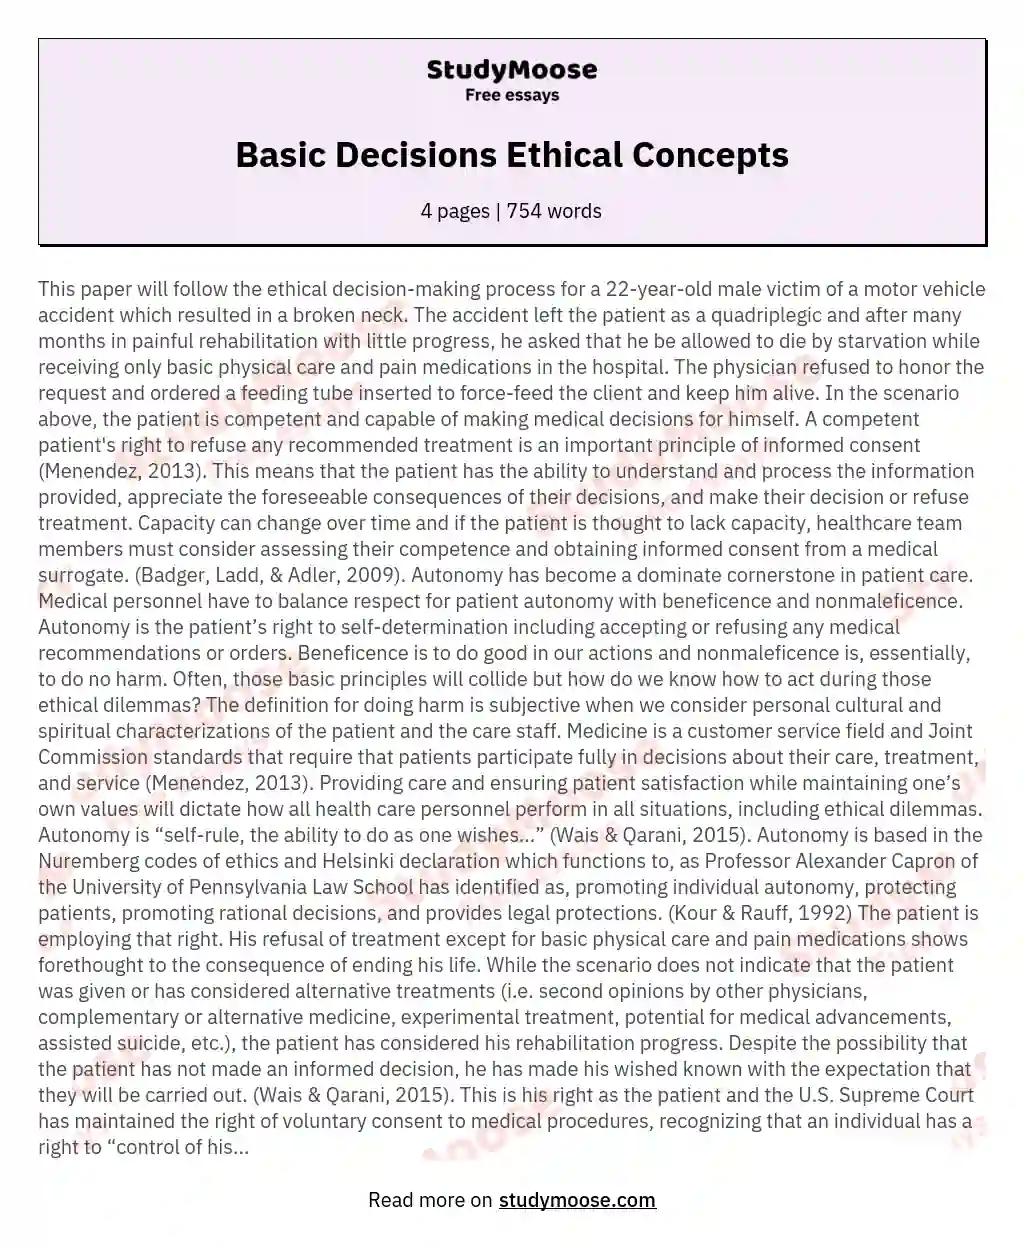 Basic Decisions Ethical Concepts essay